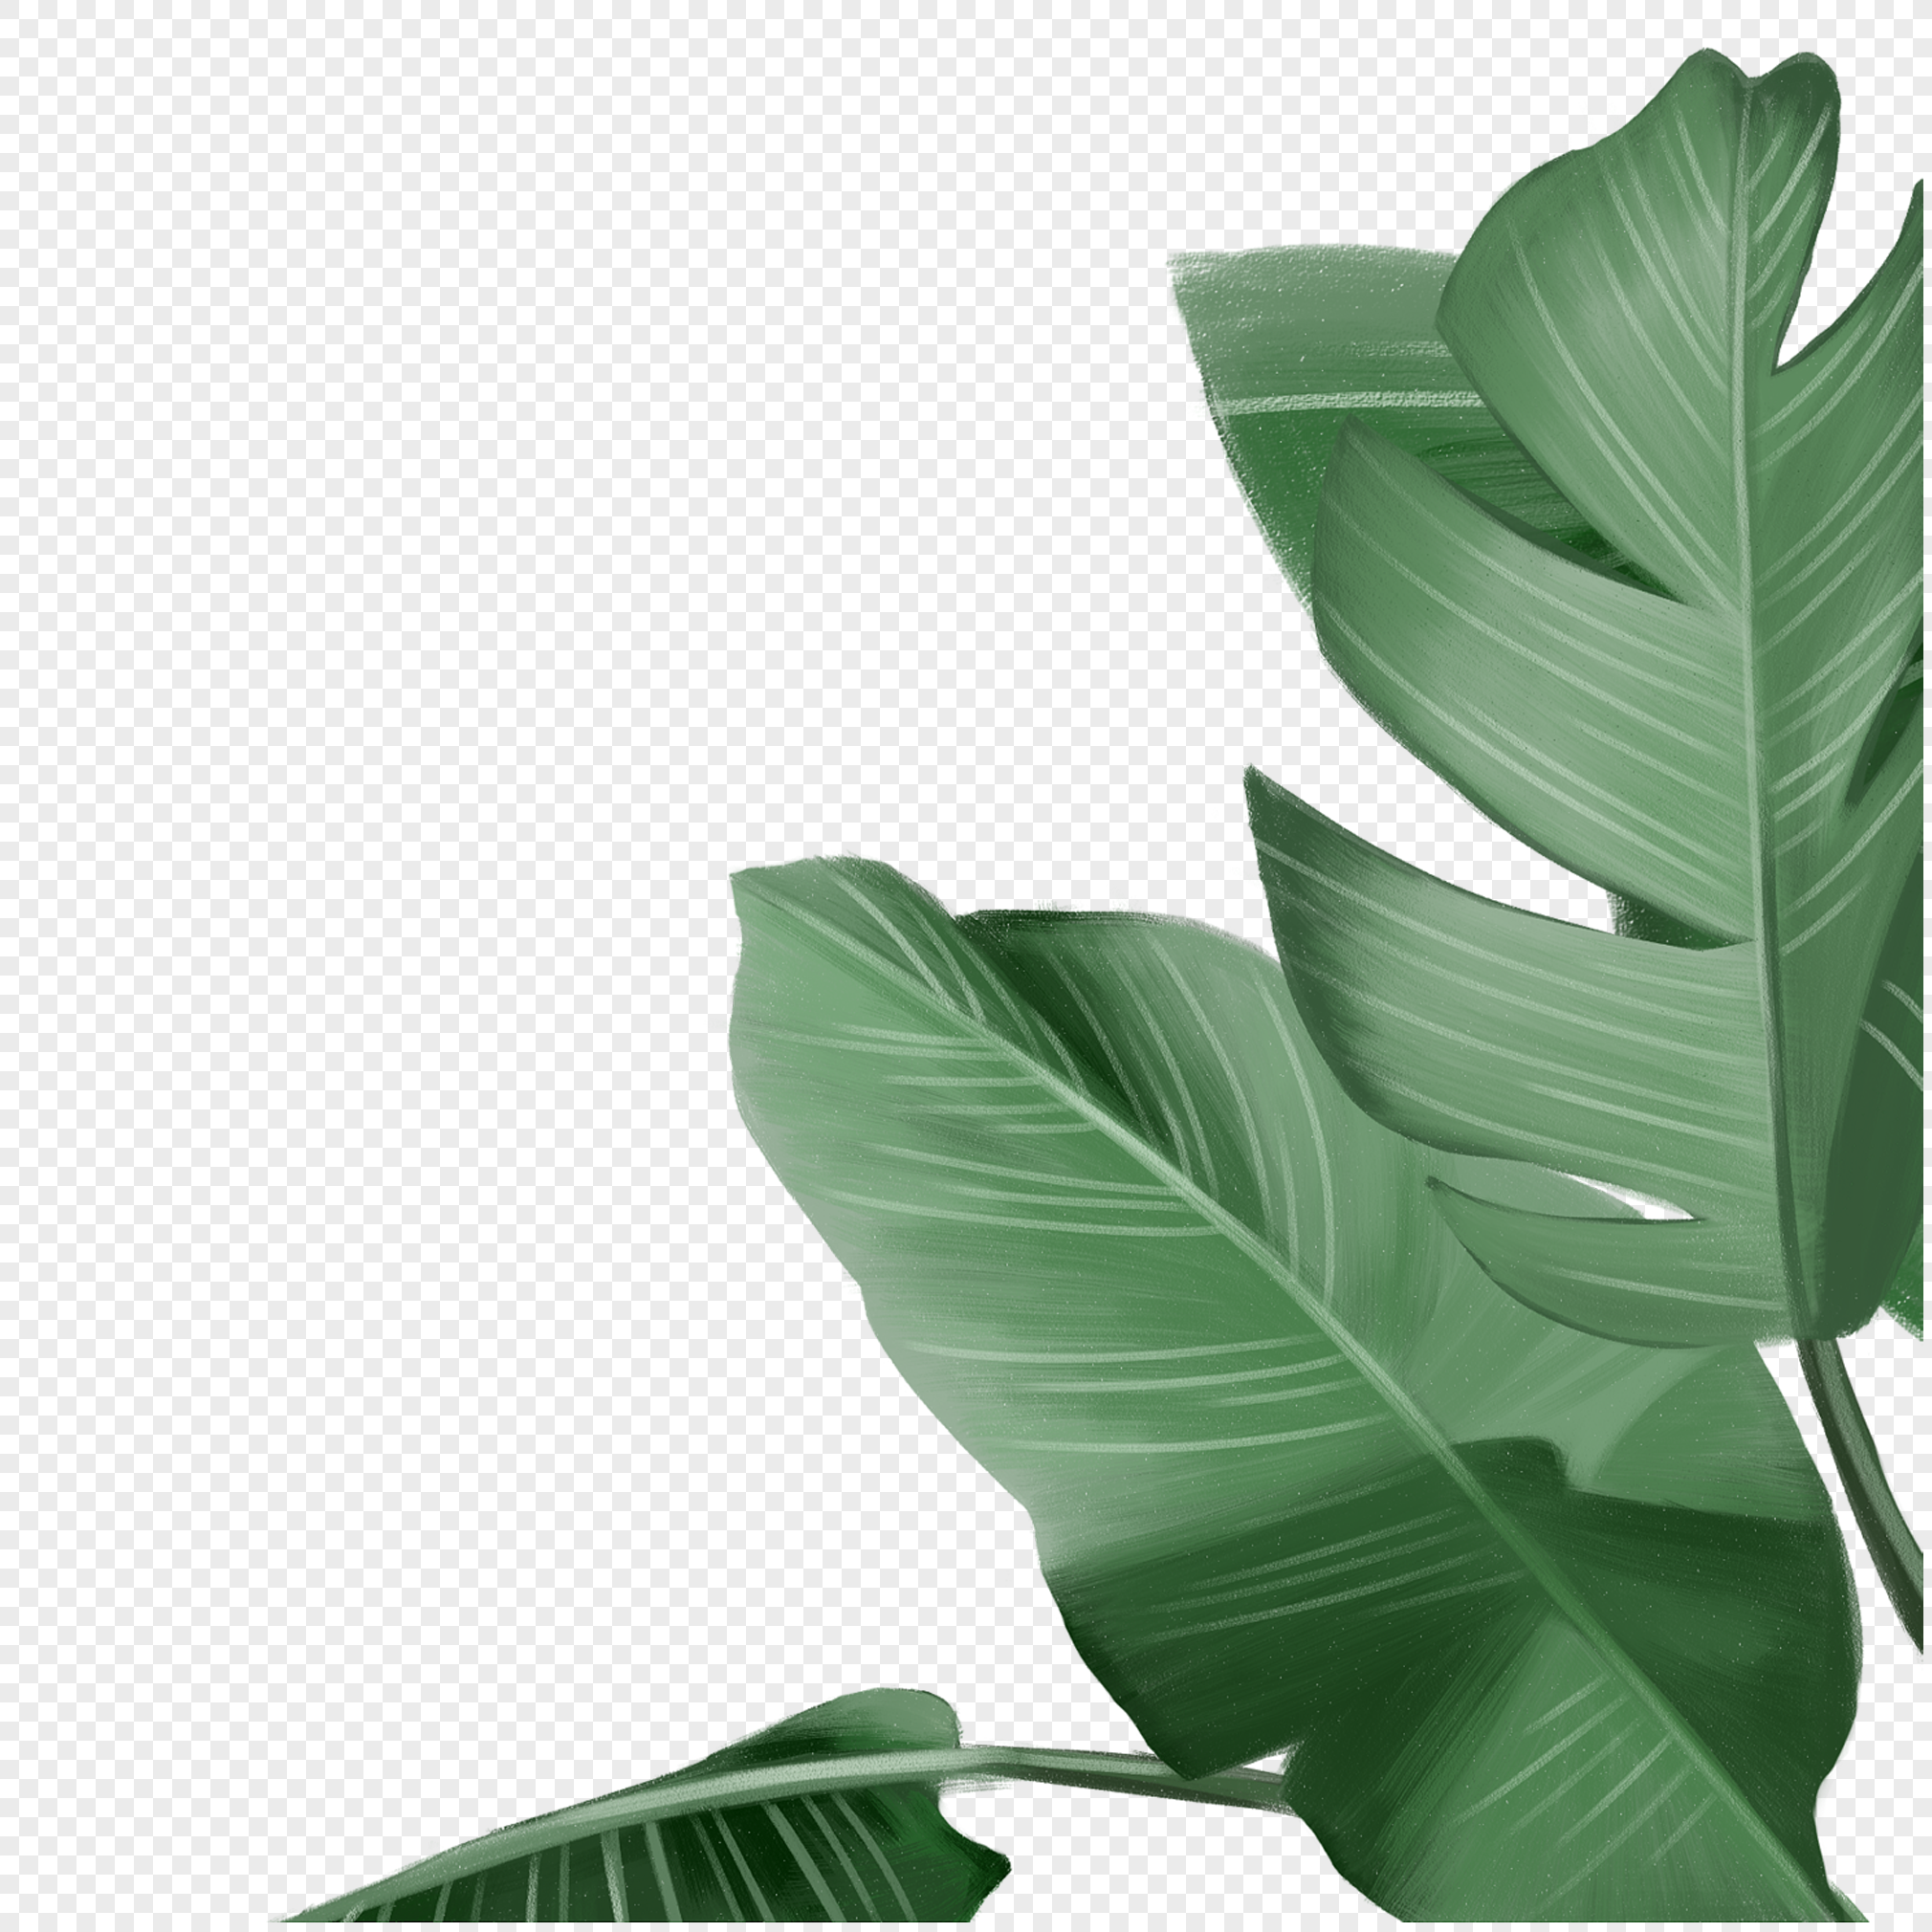 Tropical Leaves PNG Image & PSD File Free Download - Lovepik | 400209430